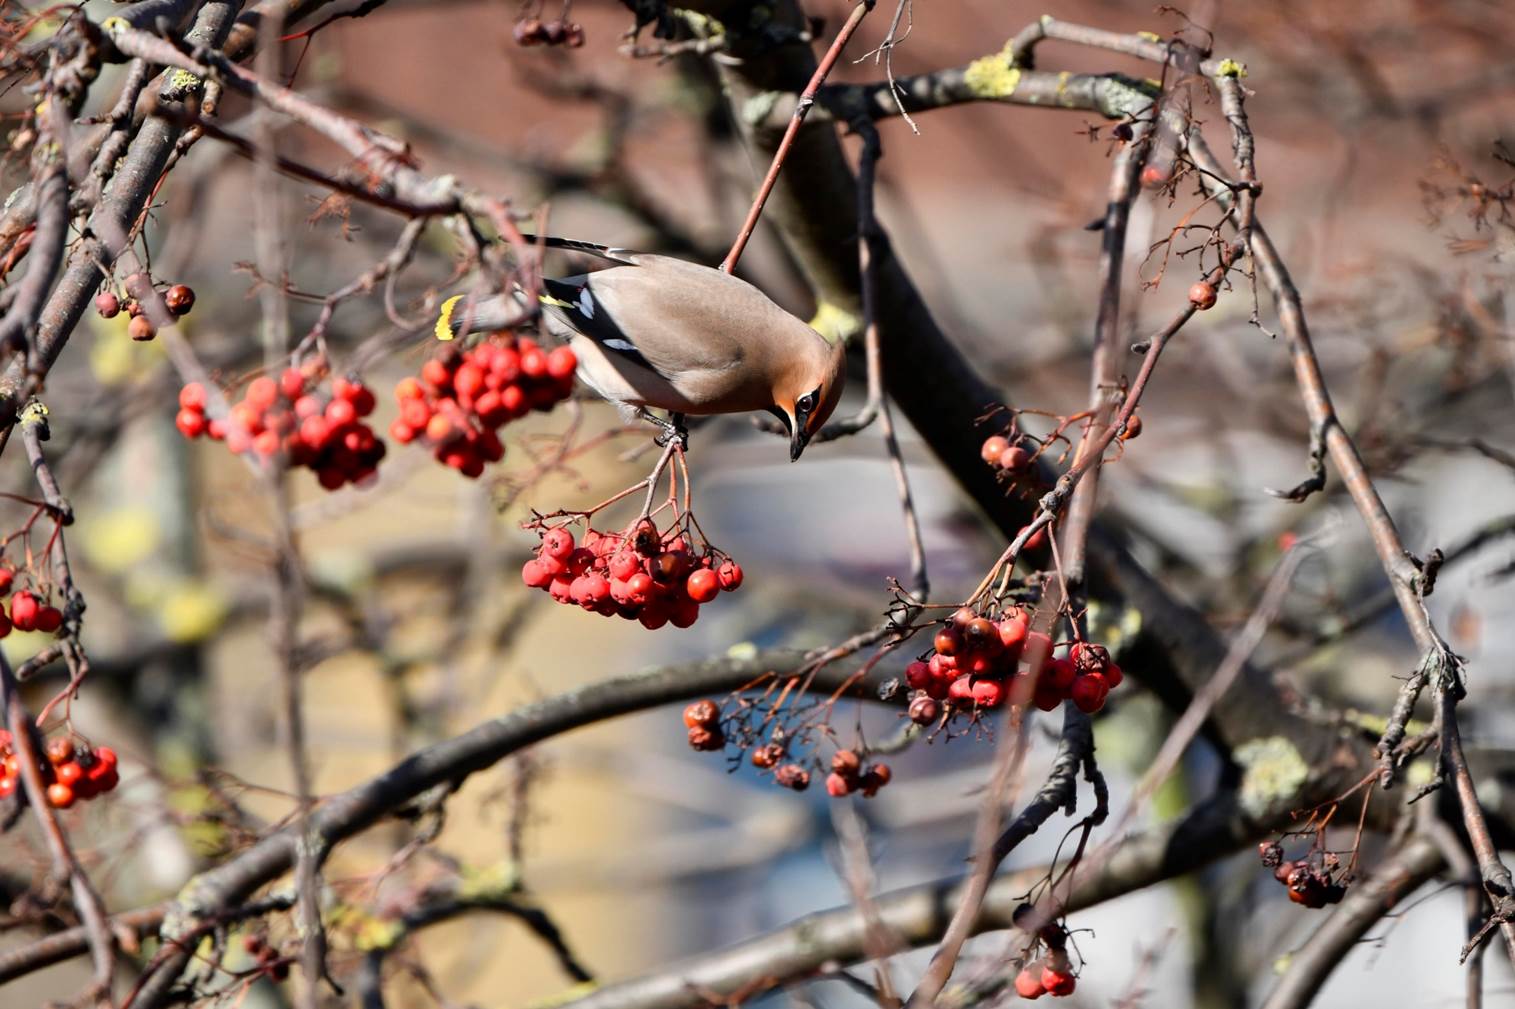 A bird on a tree branch with berries

Description automatically generated